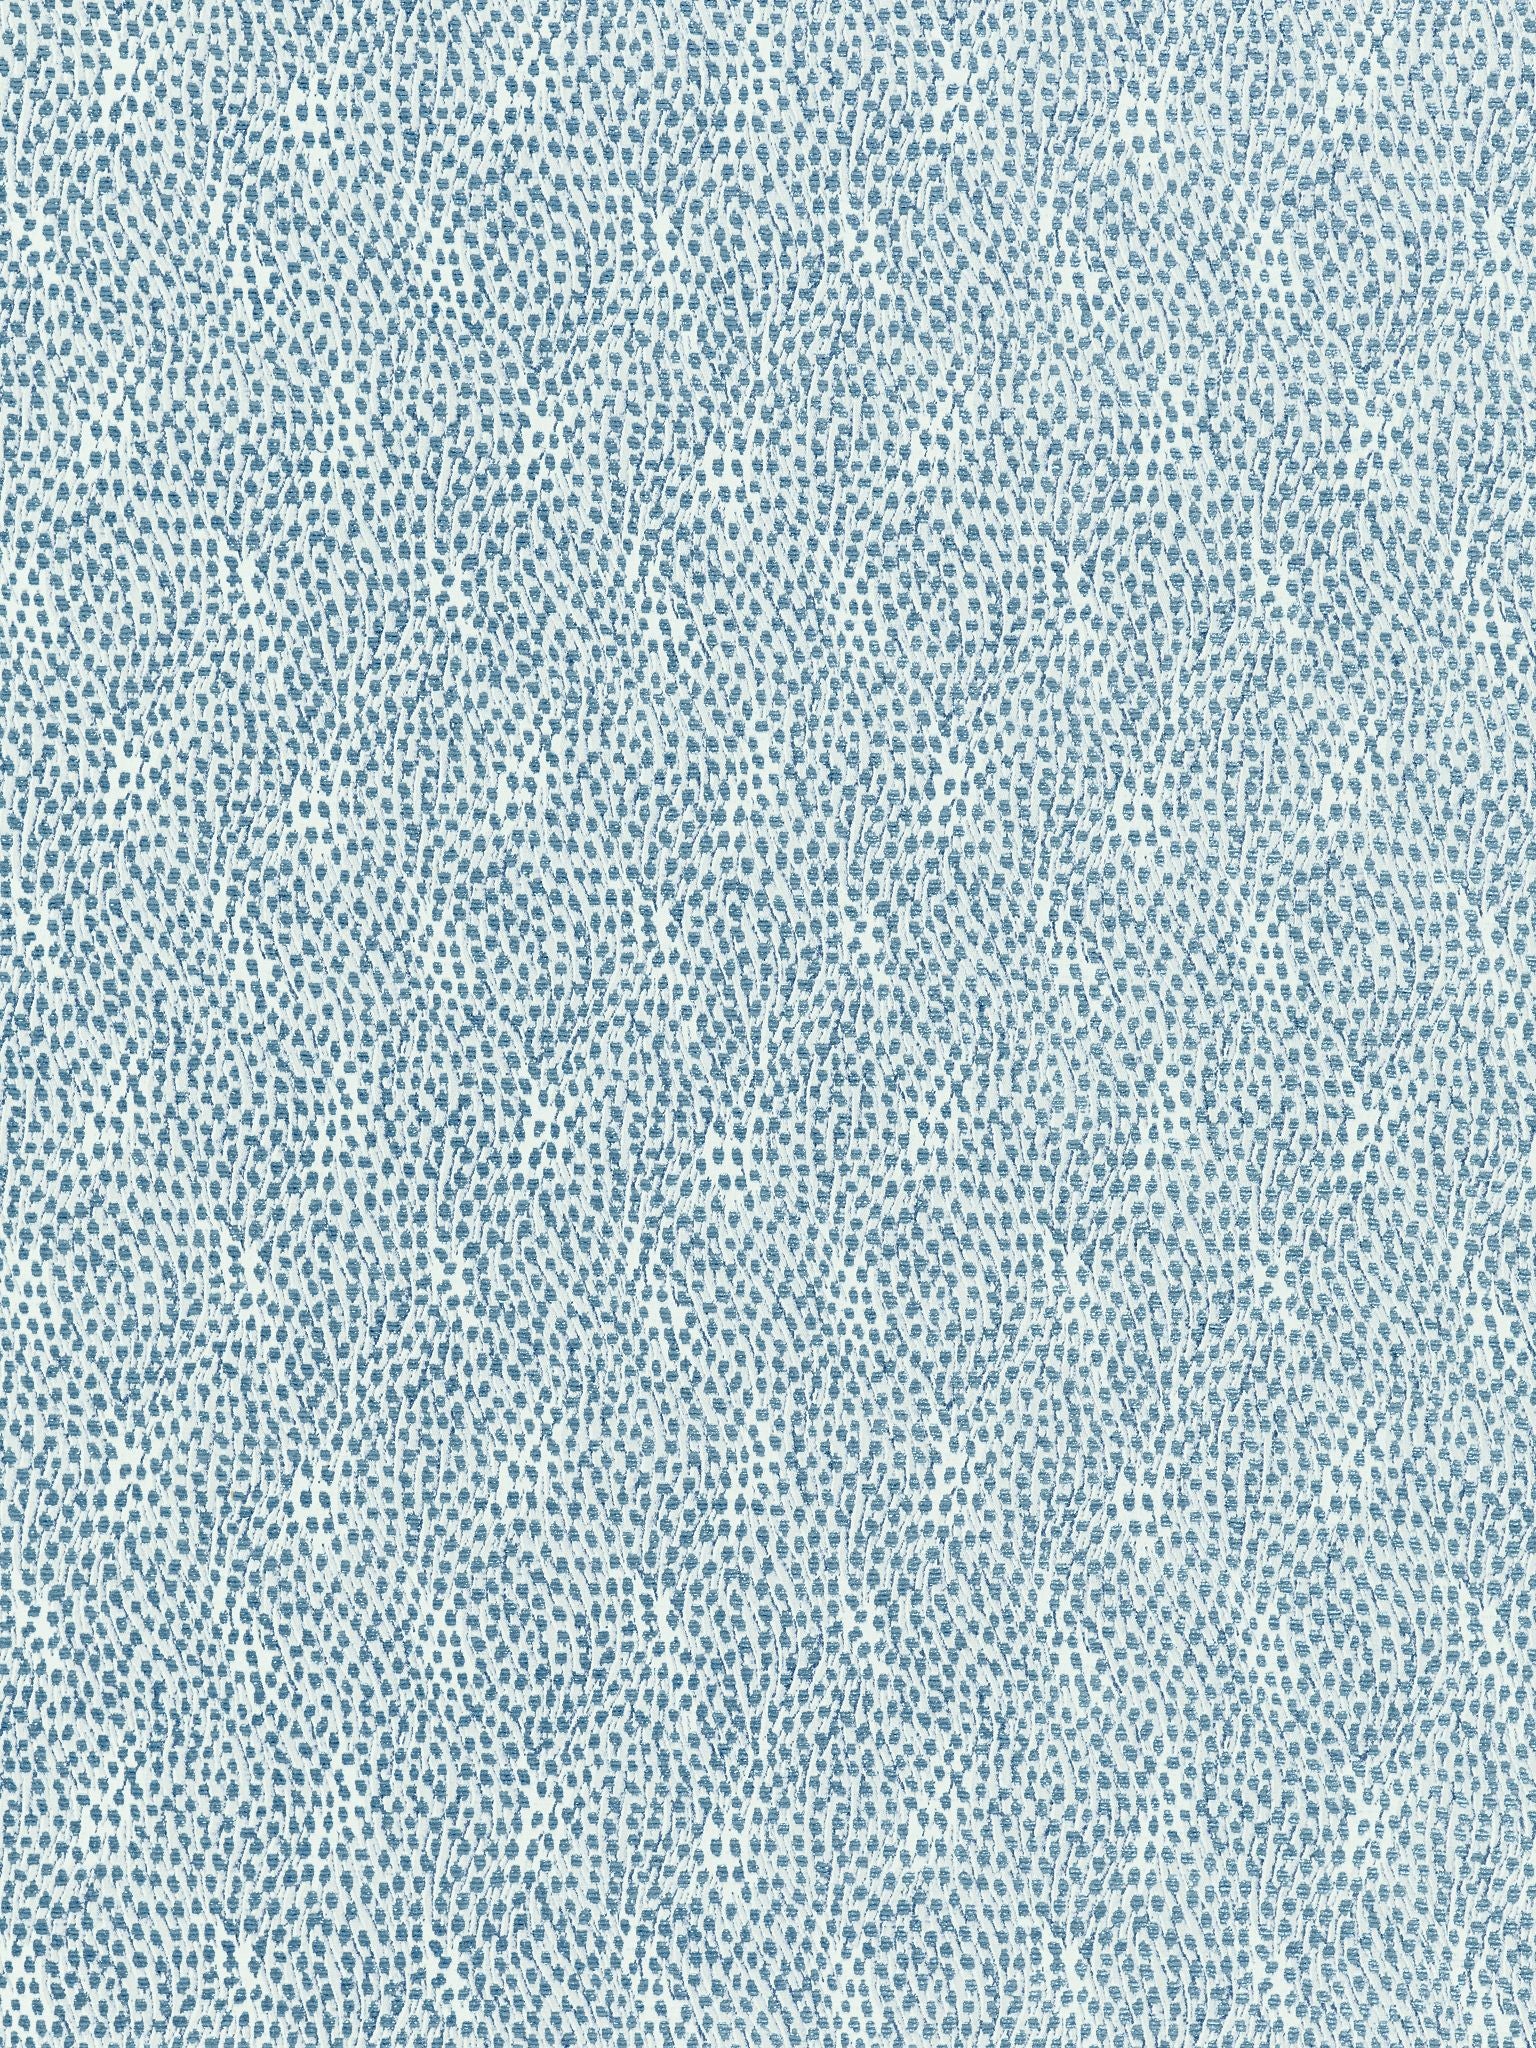 Flurry fabric in ciel color - pattern number BI 00041234 - by Scalamandre in the Old World Weavers collection